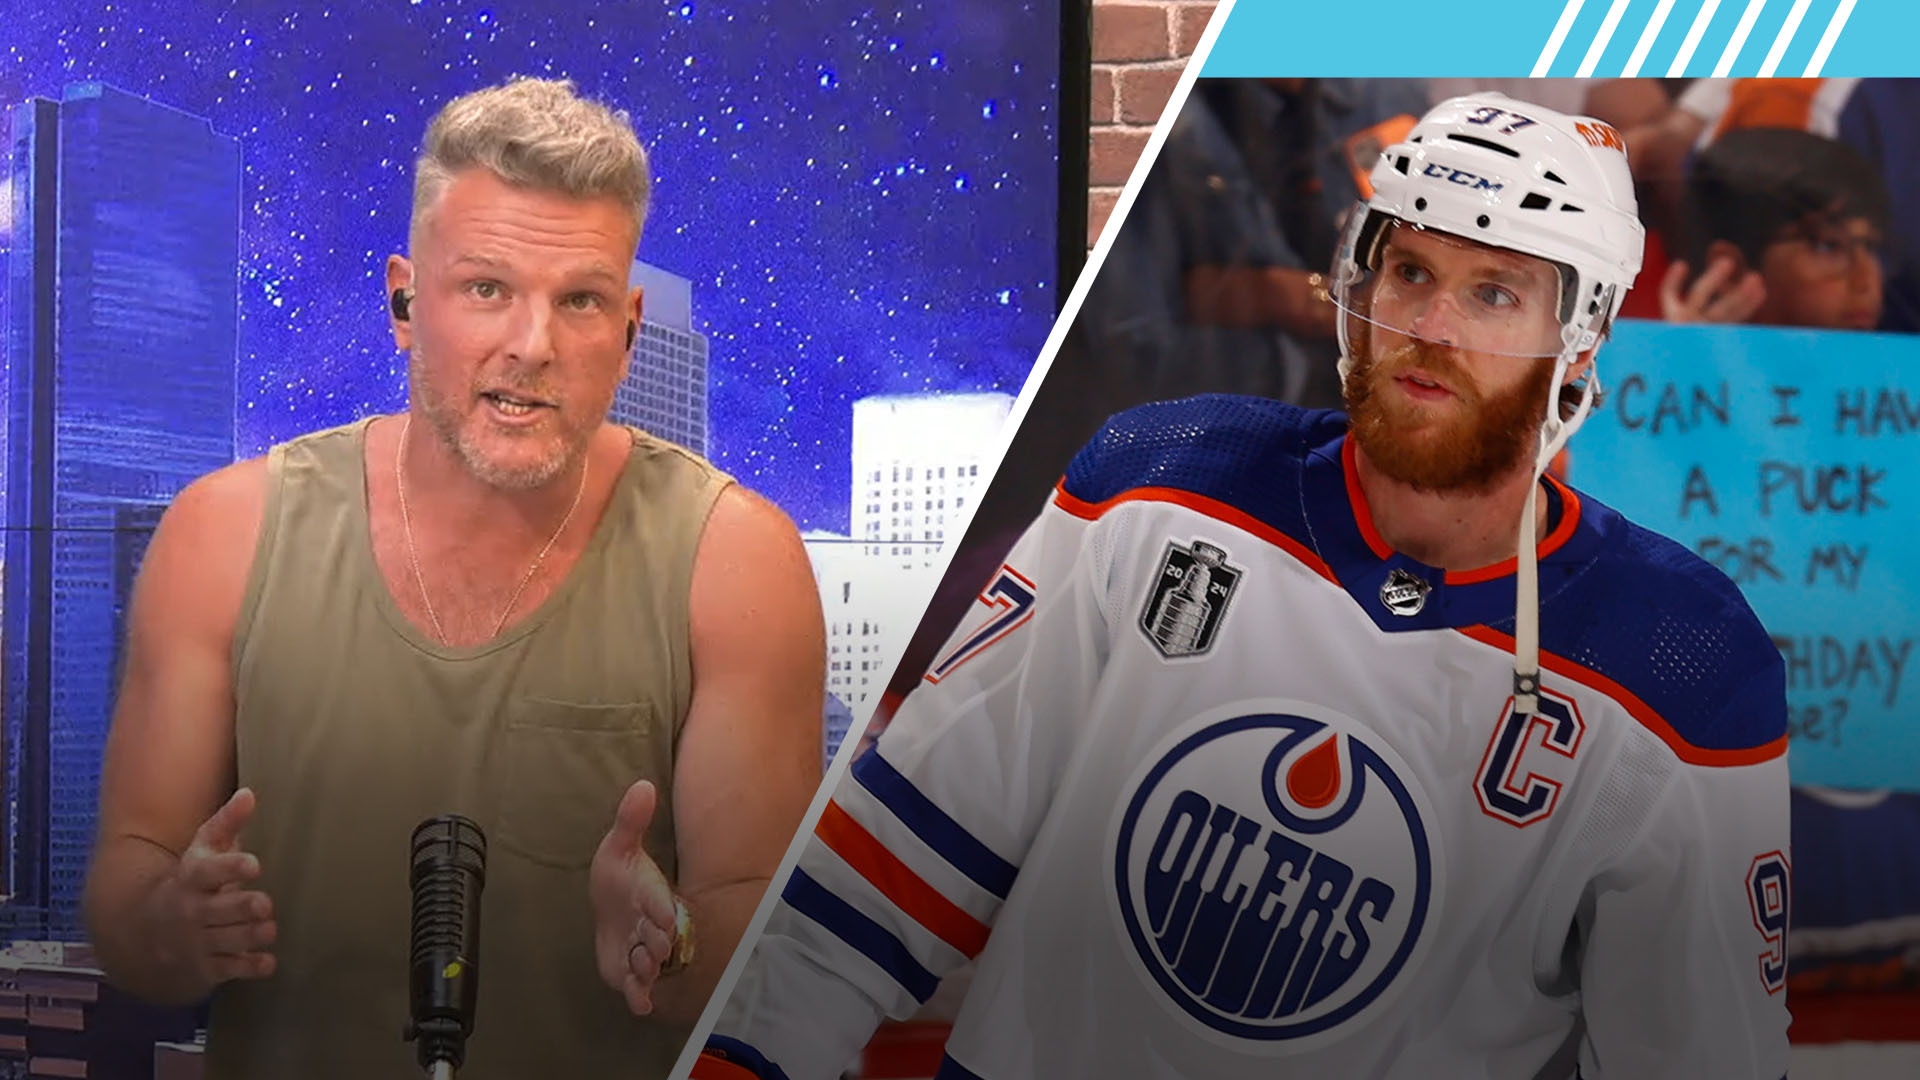 McAfee has high praise for McDavid after Oilers' Game 5 win